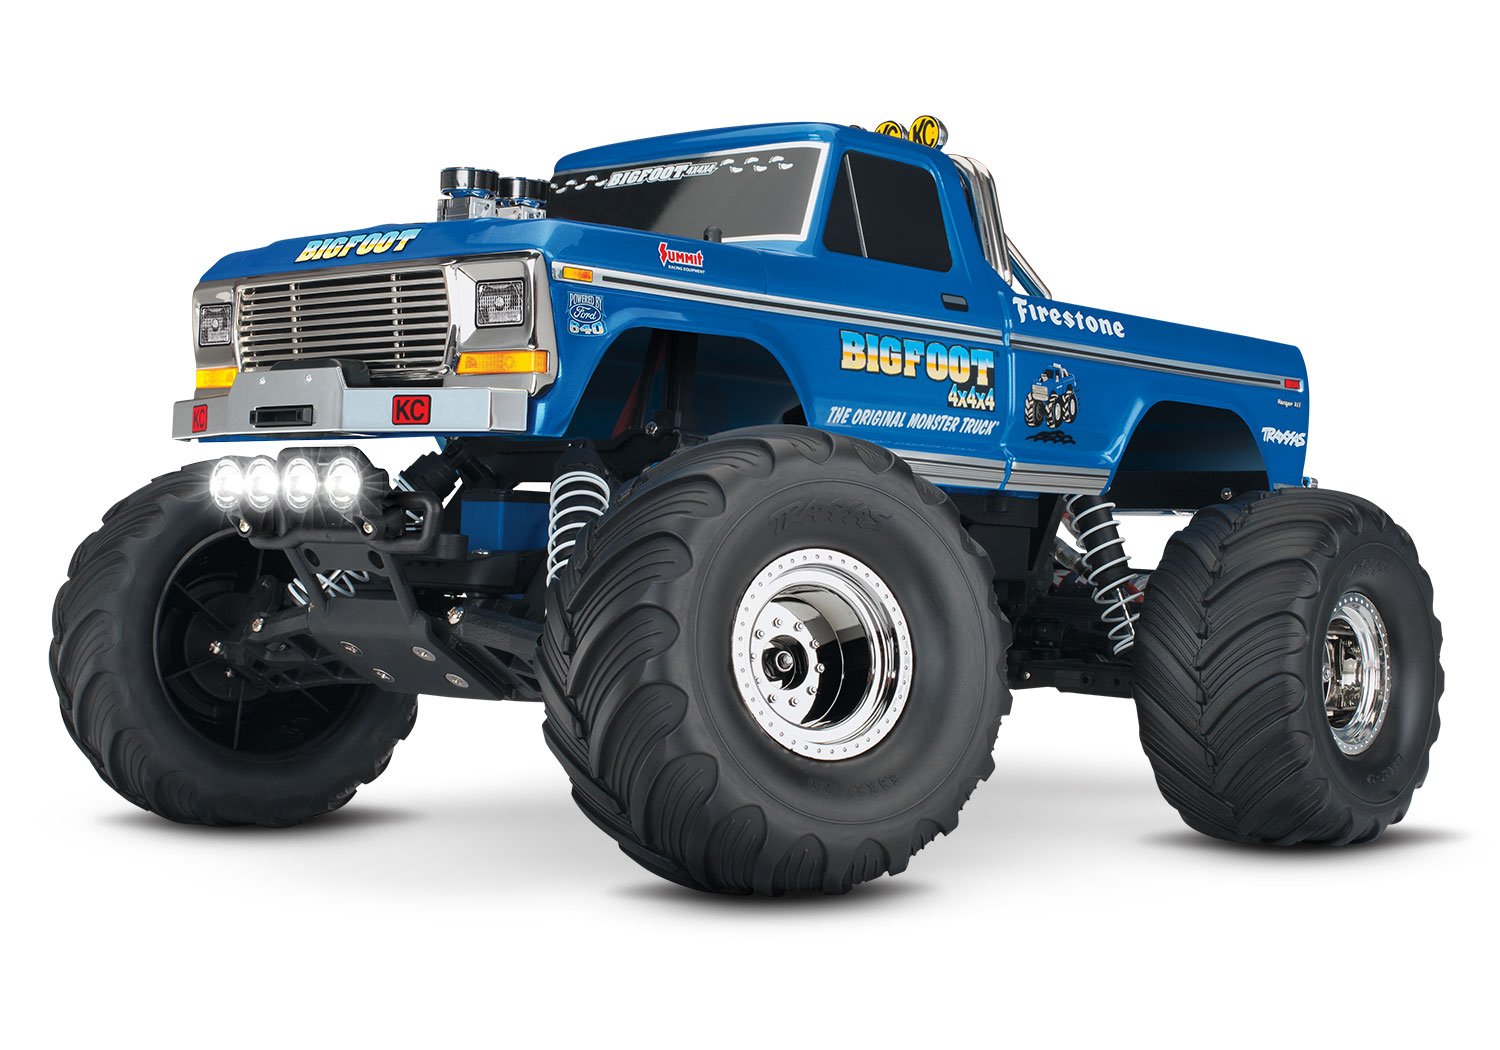 The Awesome Traxxas 1/10 2022 Bigfoot No 1 Monster Truck